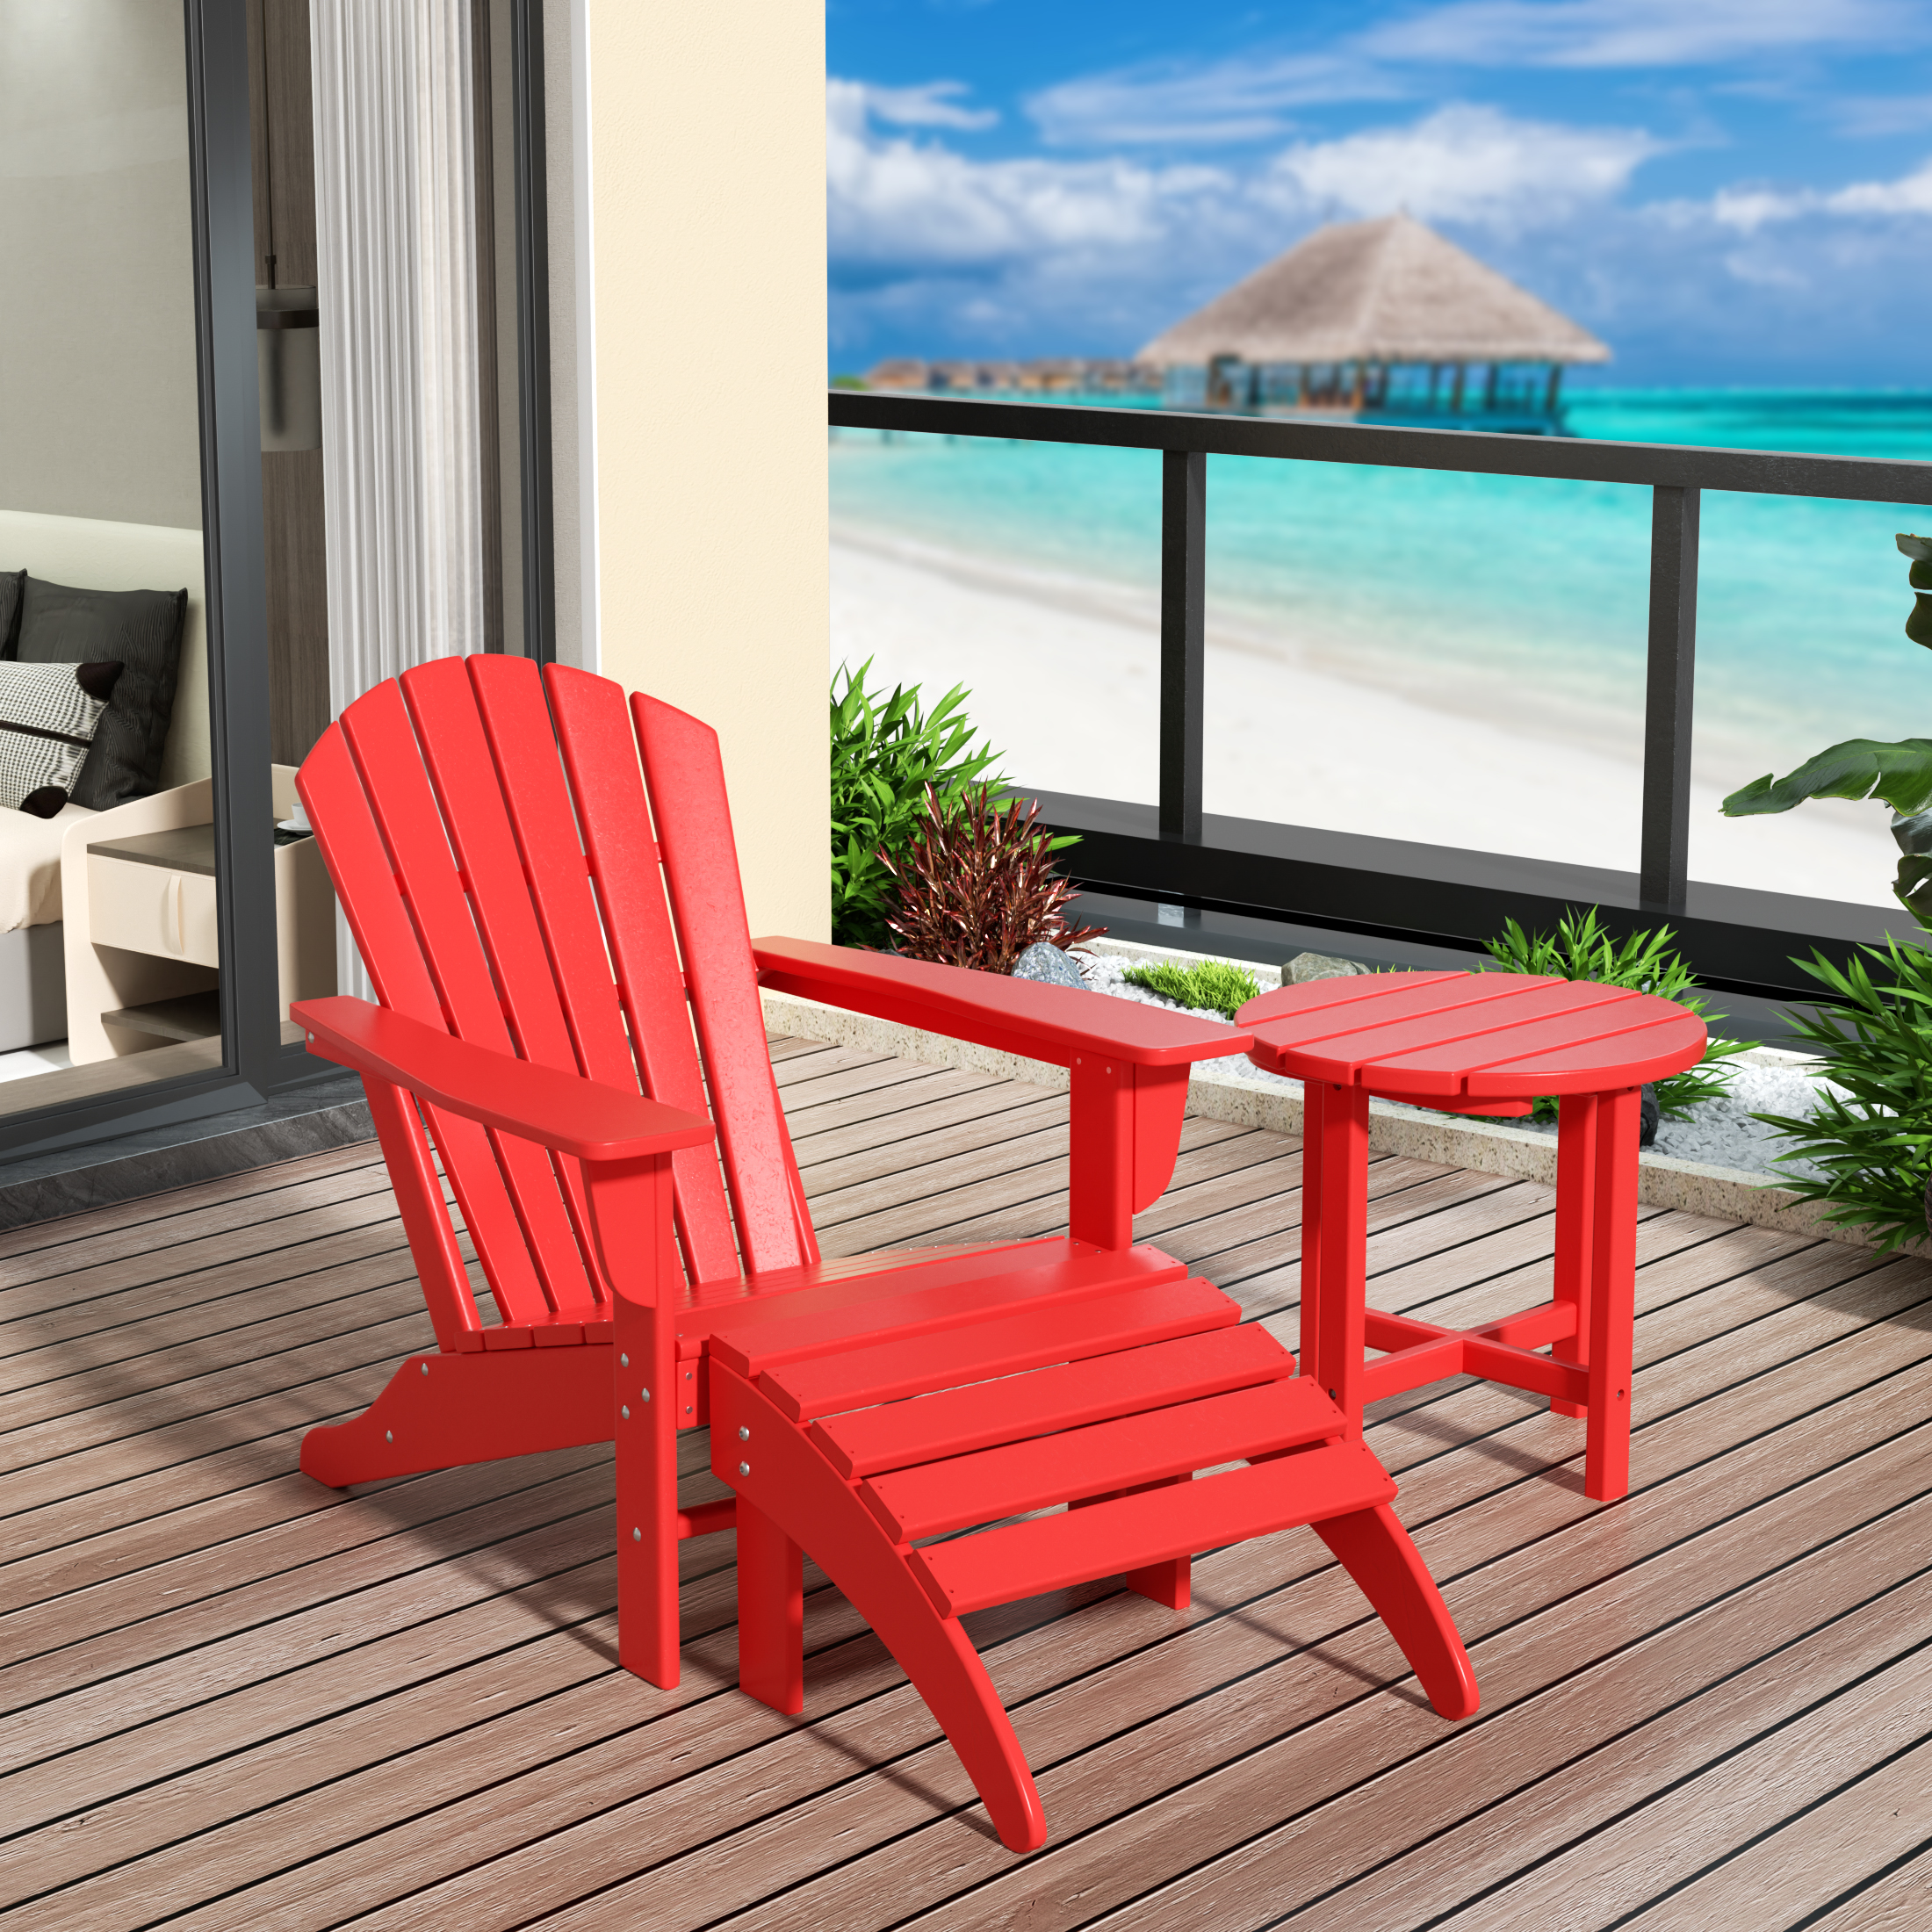 WestinTrends Dylan Outdoor Lounge Chairs Set of 2, 5 Pieces Seashell Adirondack Chairs with Ottoman and Side Table, All Weather Poly Lumber Outdoor Patio Chairs Furniture Set, Red - image 3 of 9